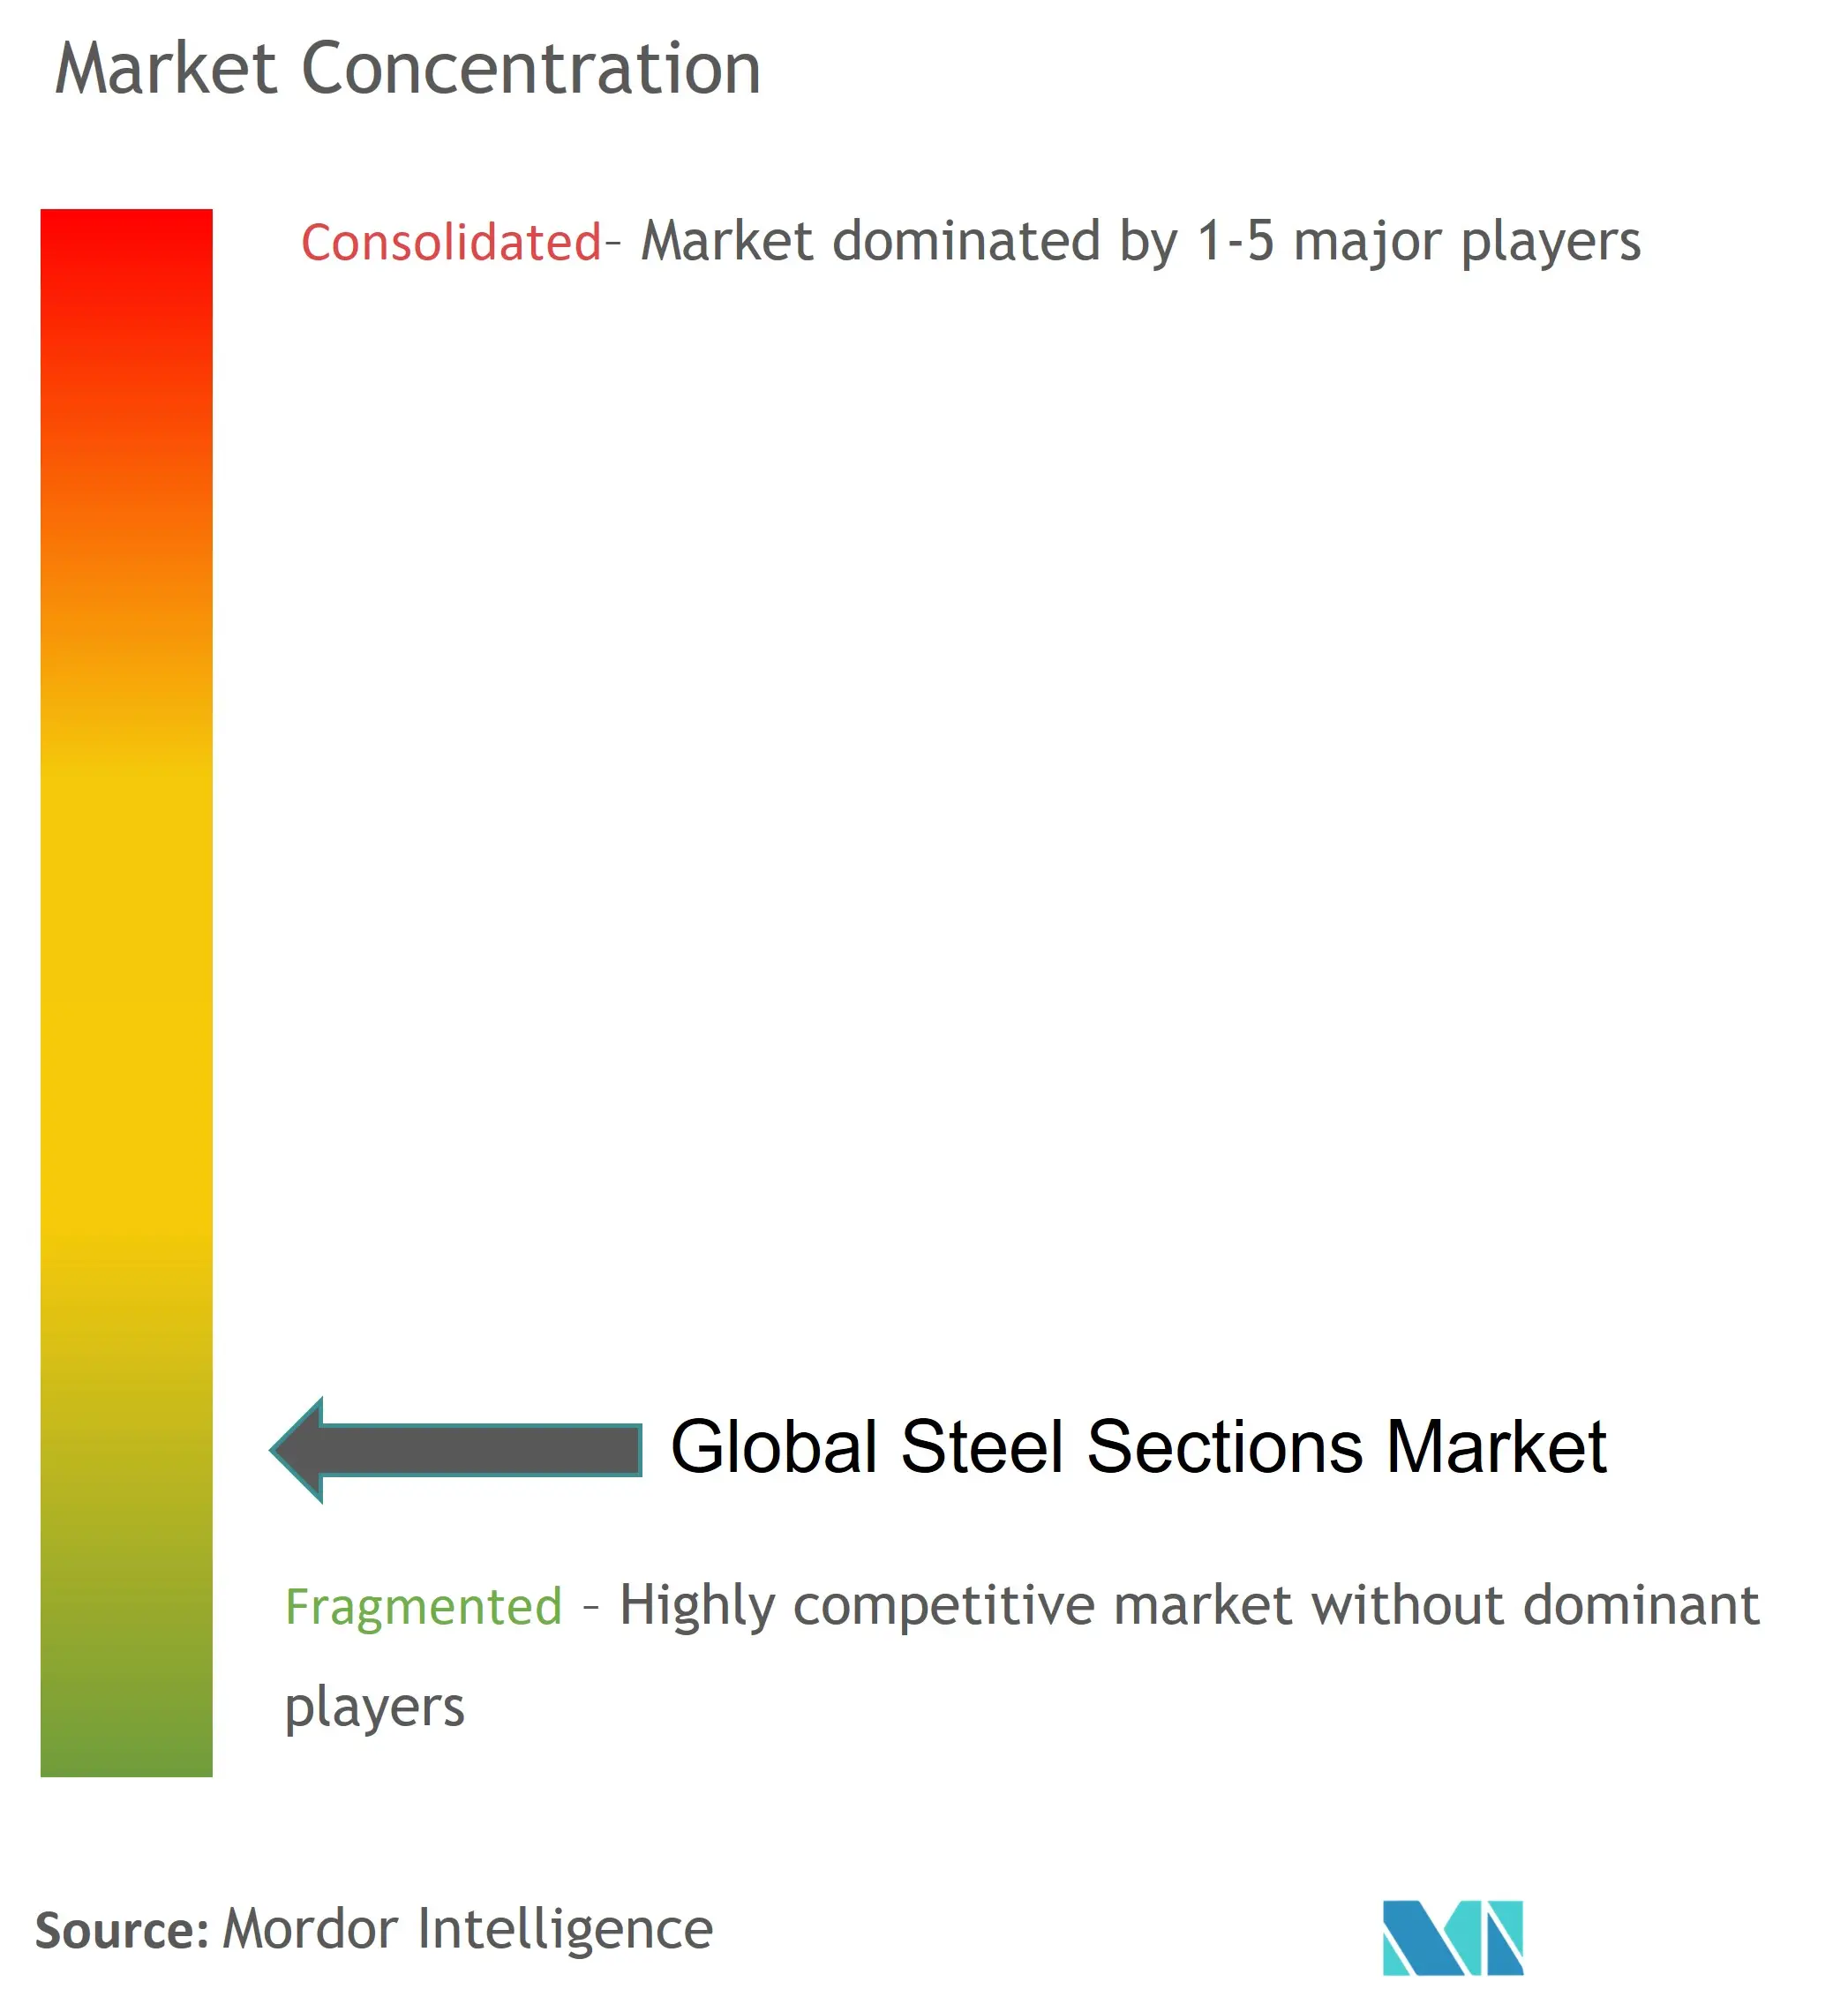 Global Steel Sections Market Concentration